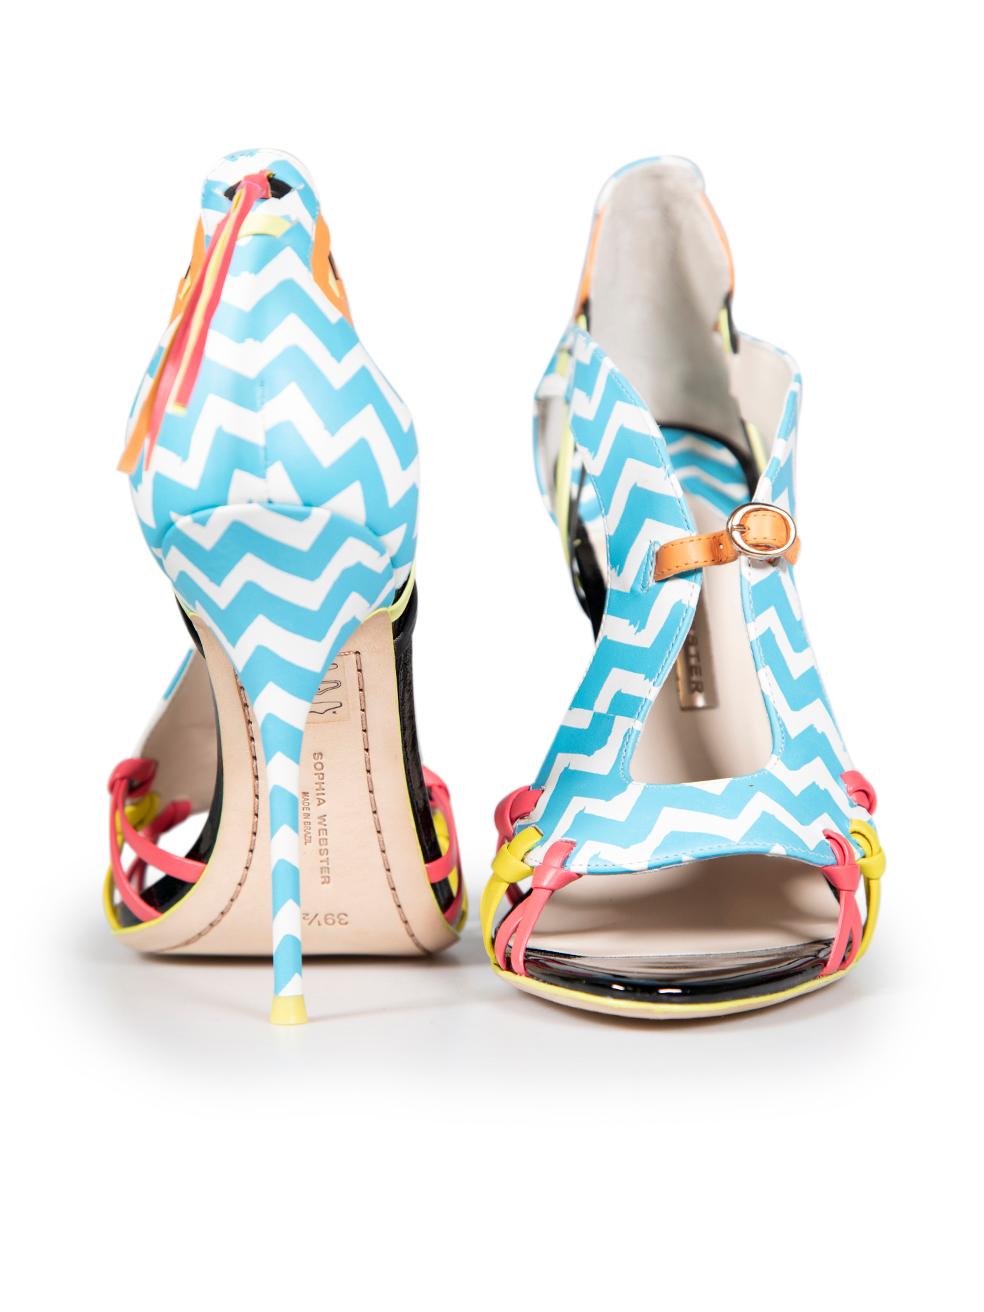 Sophia Webster Liberty Zig Zag Leather Strappy Sandals Size IT 39.5 In New Condition For Sale In London, GB